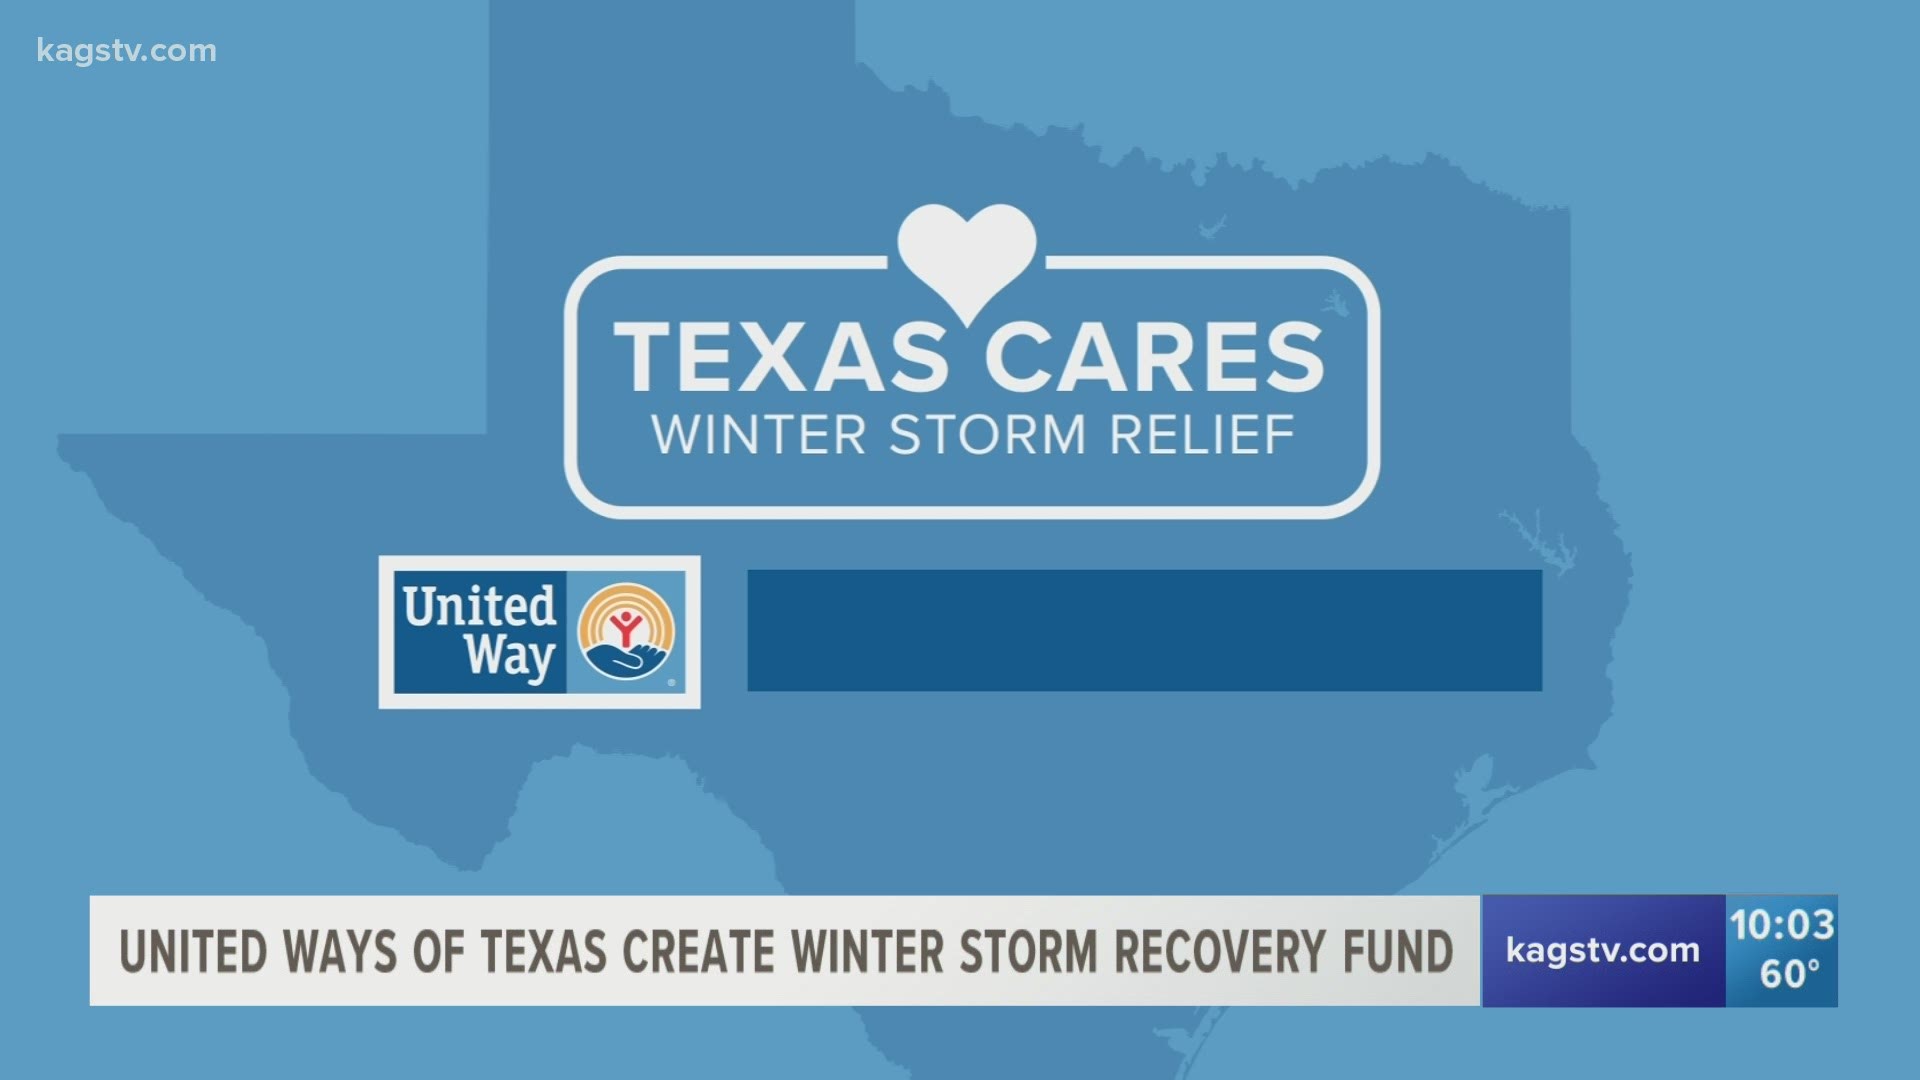 United Ways of Texas has created The United Way The Winter Weather Recovery Fund. The Brazos Valley will use funds raised to help local non-profits.